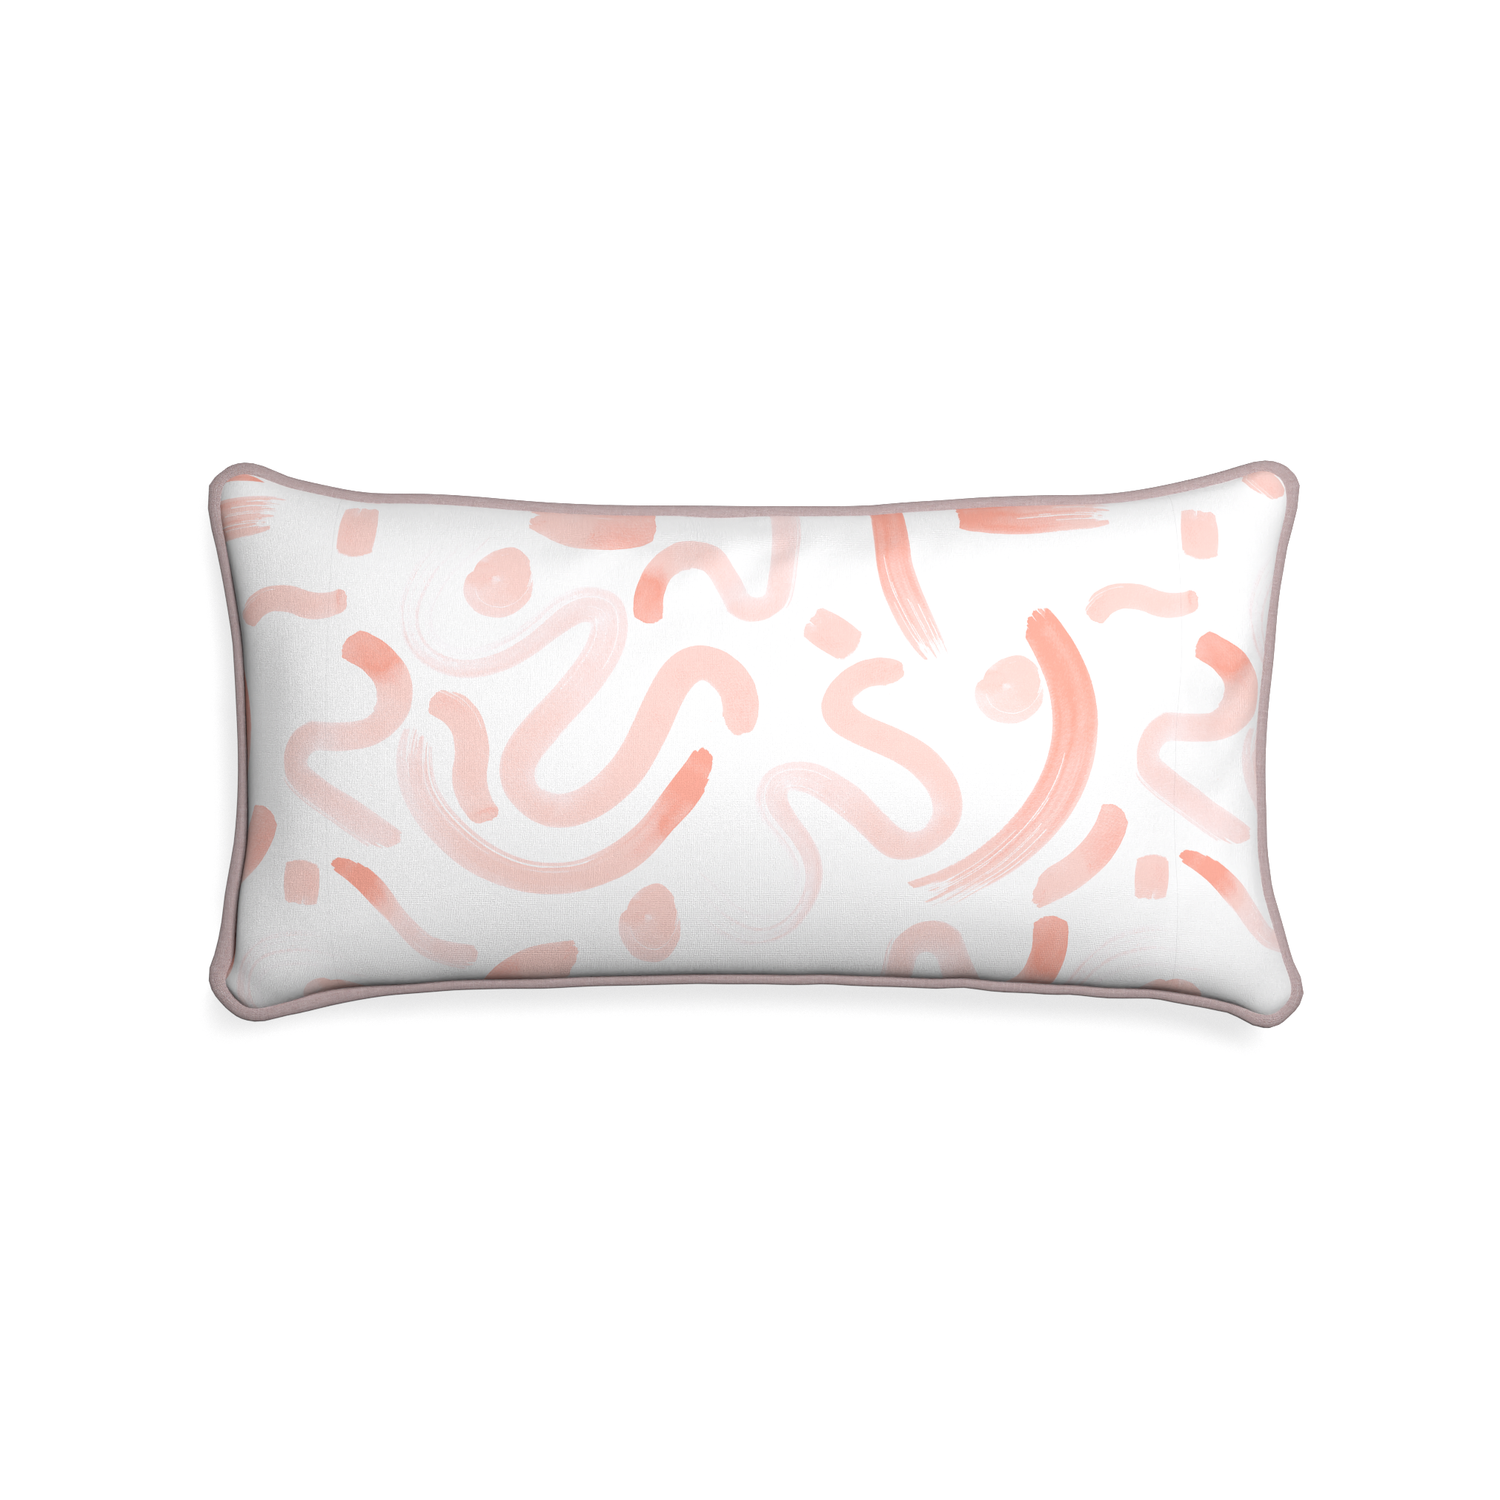 Midi-lumbar hockney pink custom pink graphicpillow with orchid piping on white background